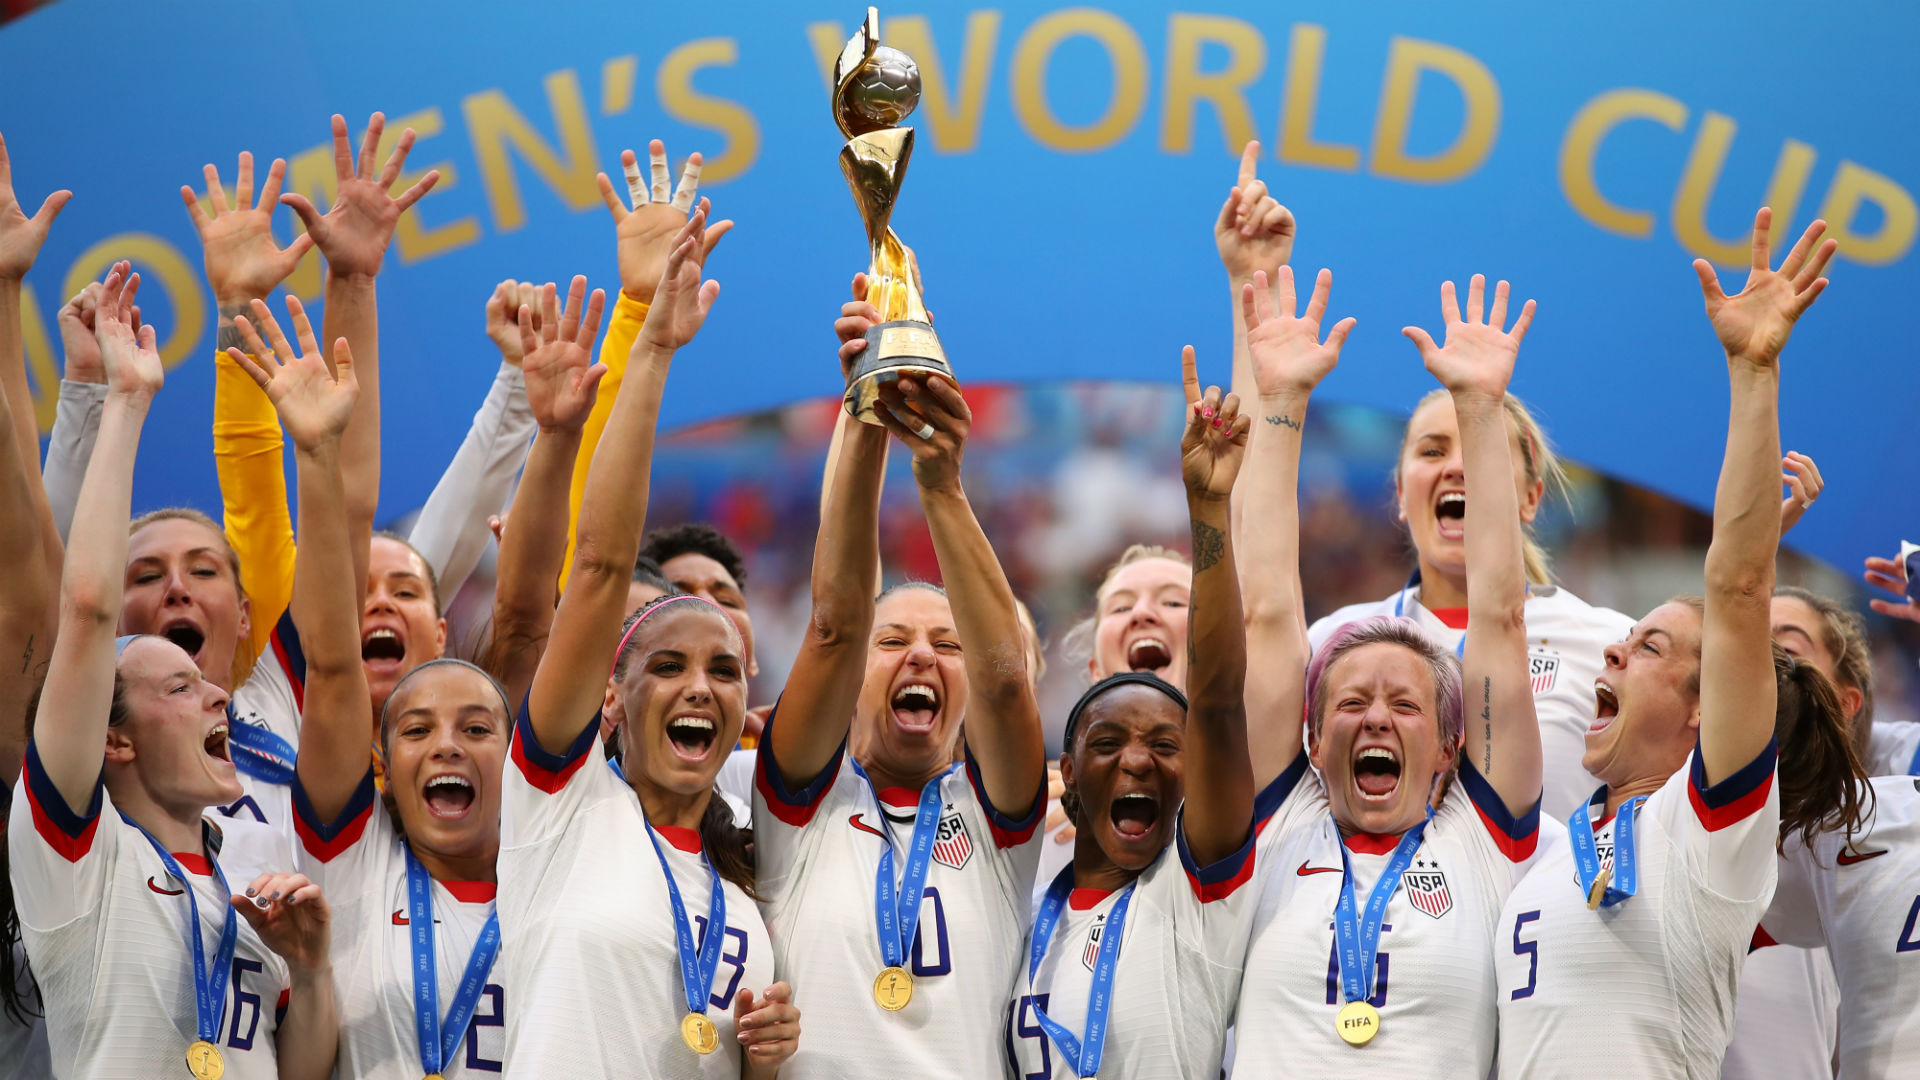 FIFA confirms it will select 2023 Women's World Cup host on June 25